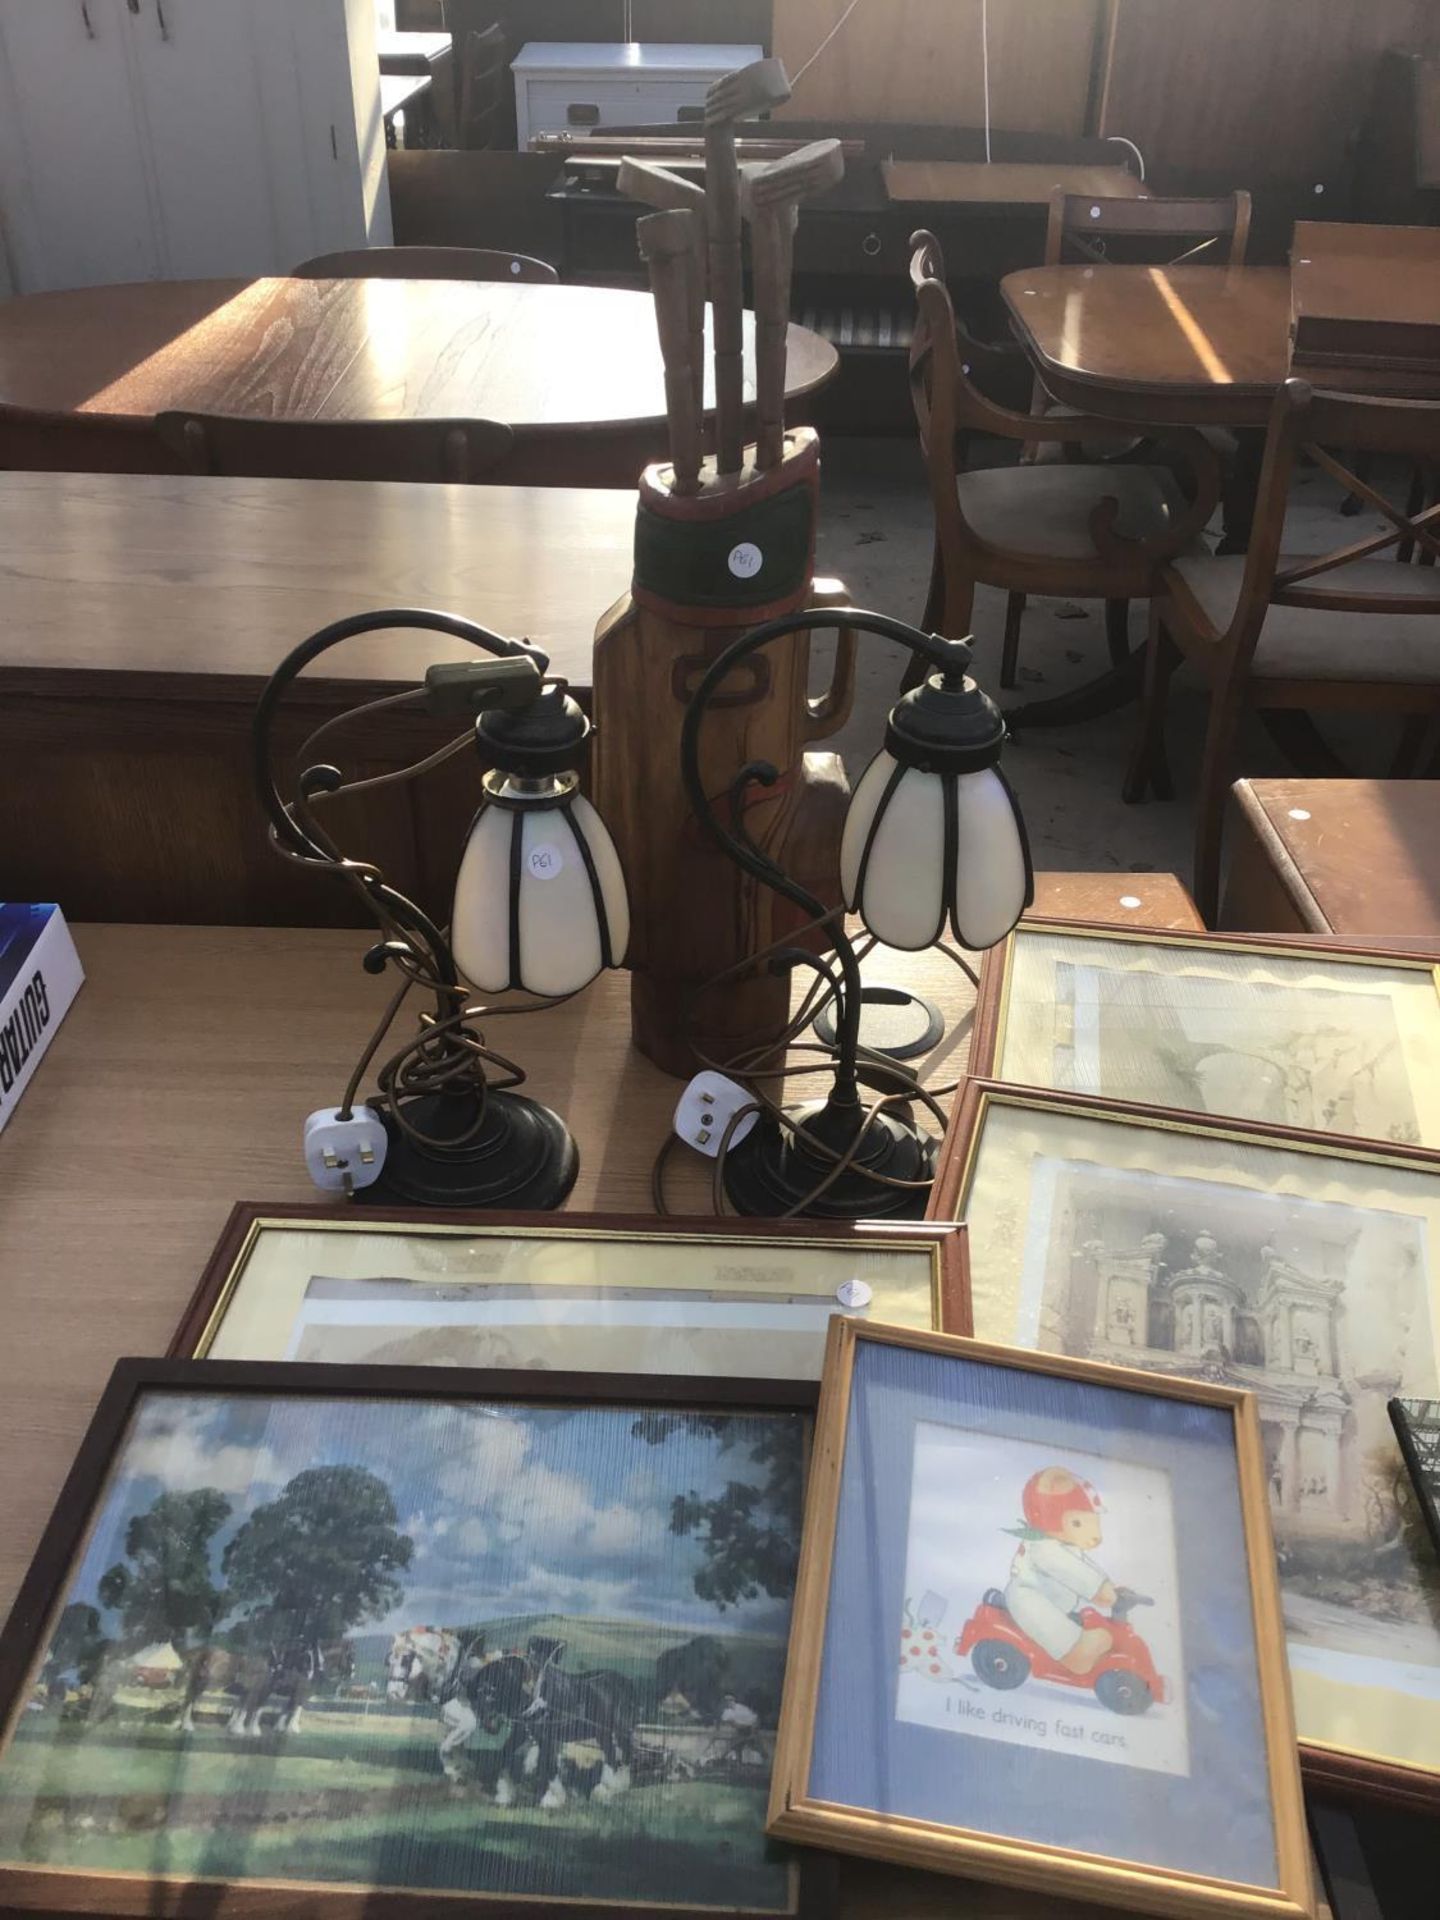 A PAIR OF TIFFANY STYLE TABLE LAMPS, A WOODEN GOLF BAG AND CLUBS AND VARIOUS PICTURES - Image 3 of 3